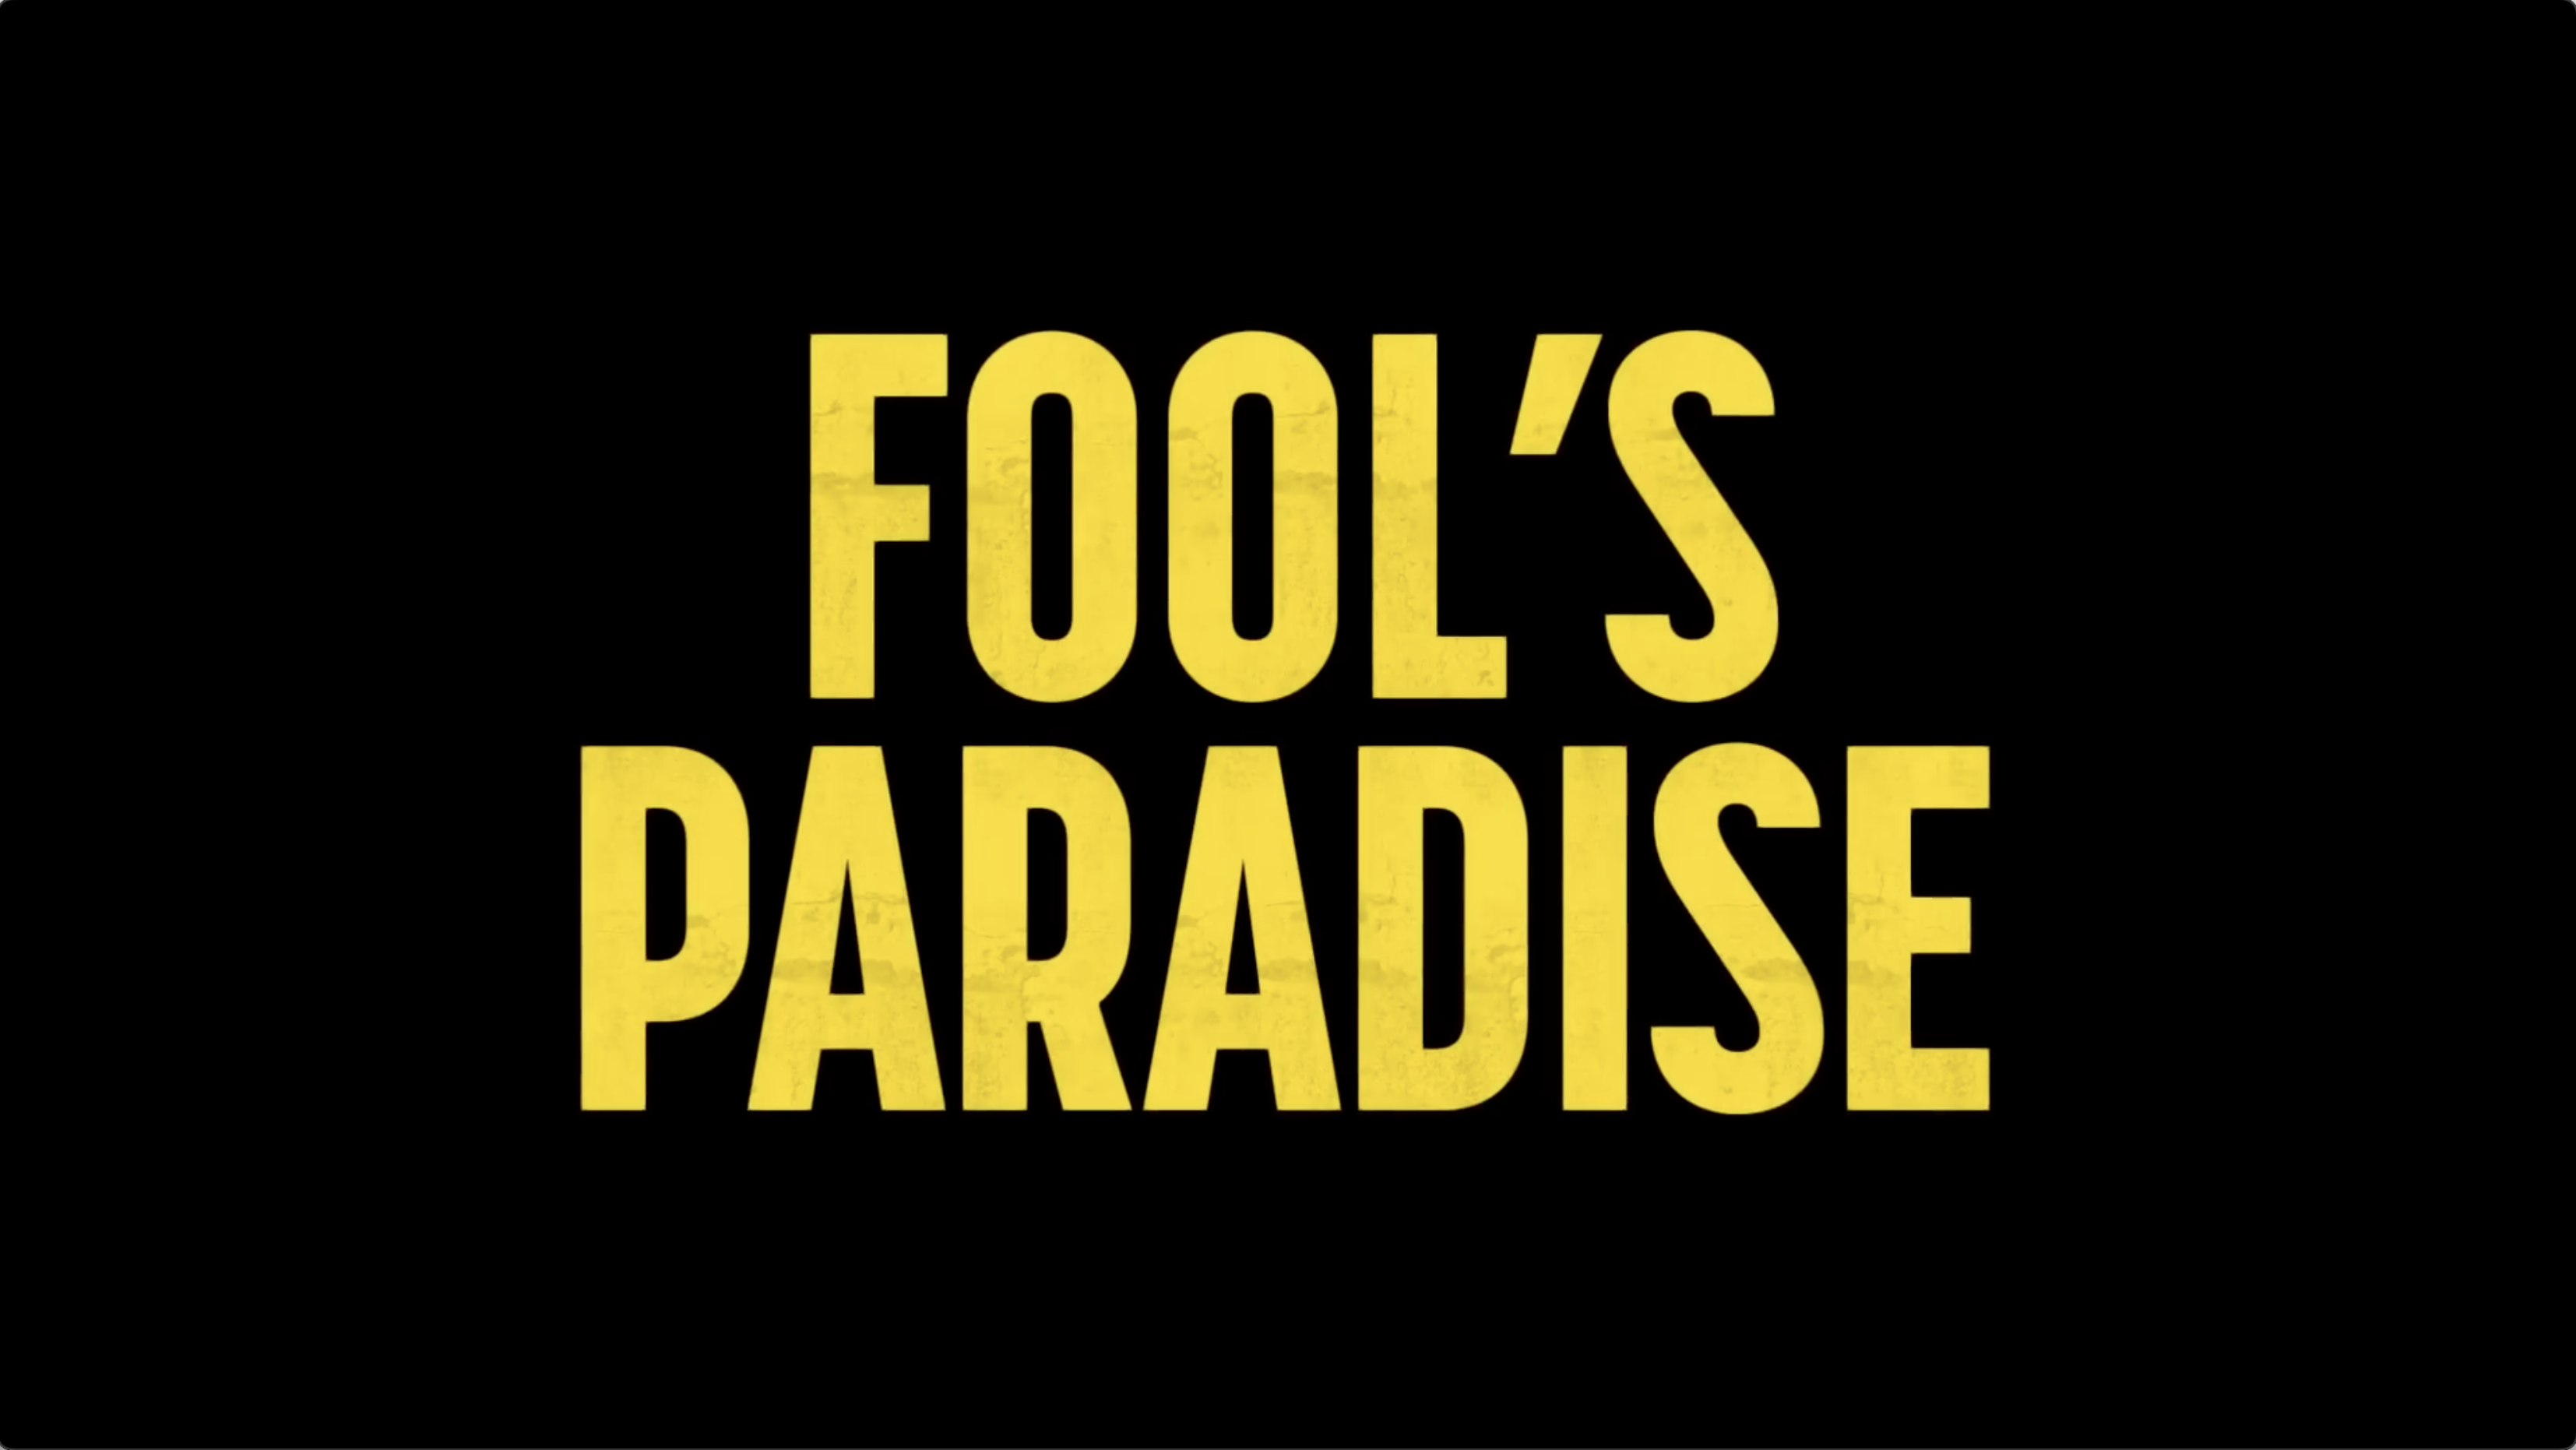 Fool's Paradise, Official Trailer